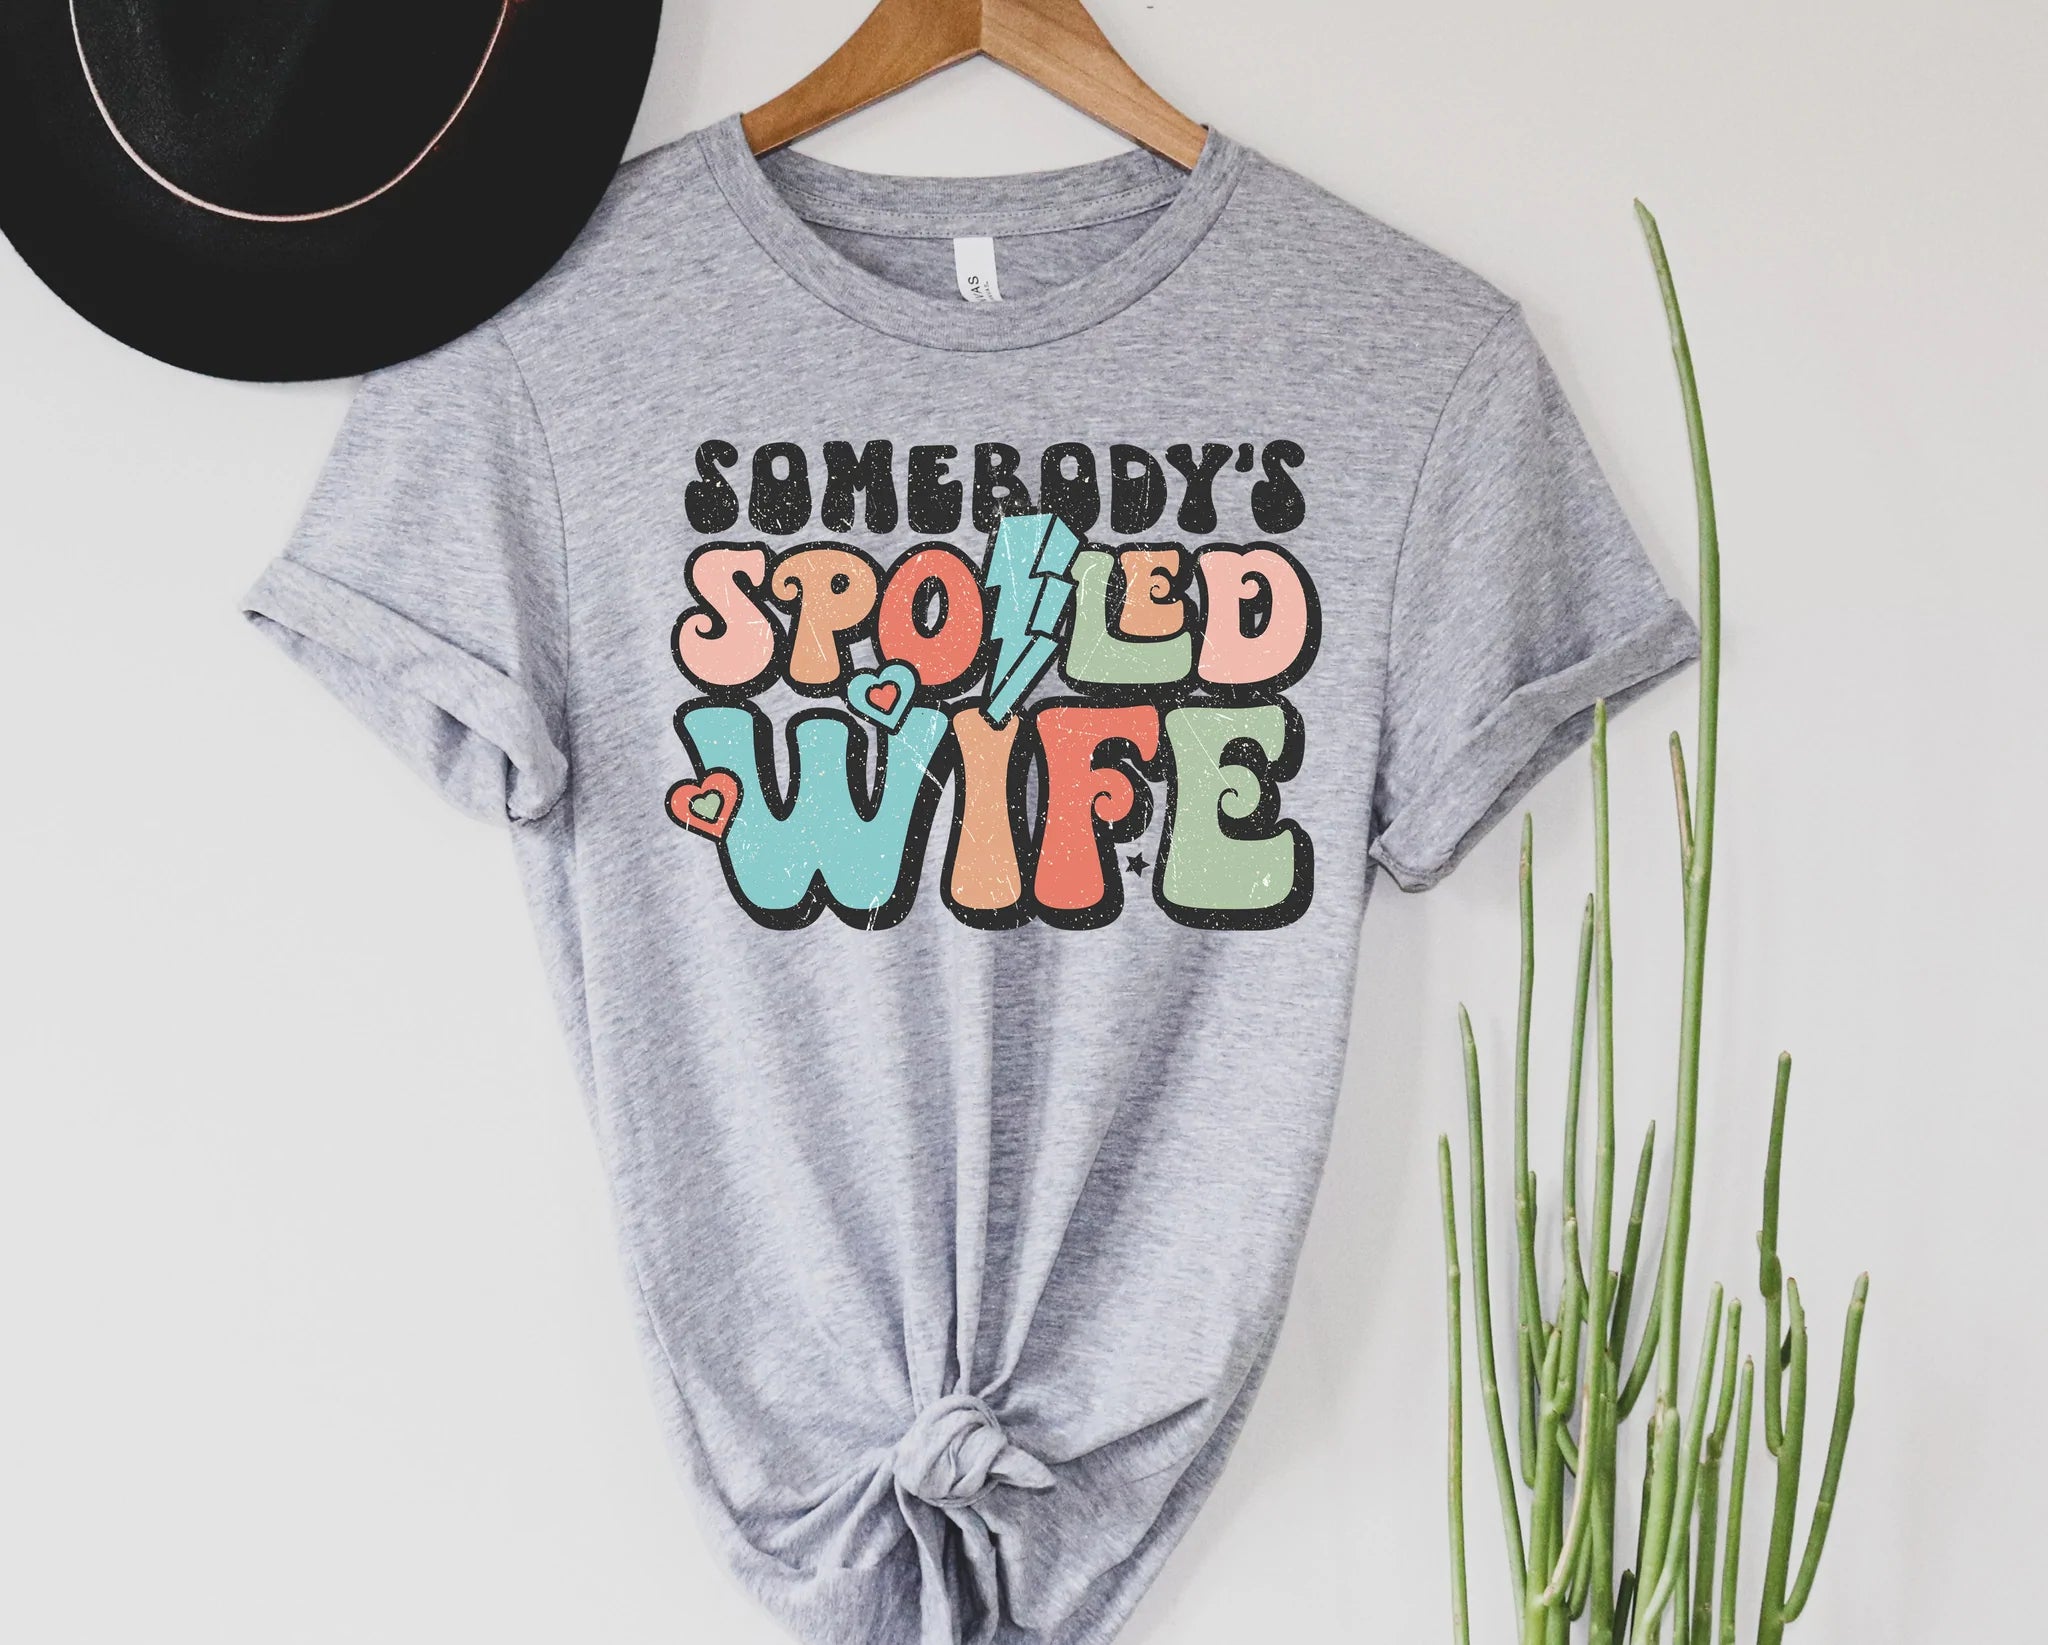 Somebody's Spoiled Wife Graphic Tee